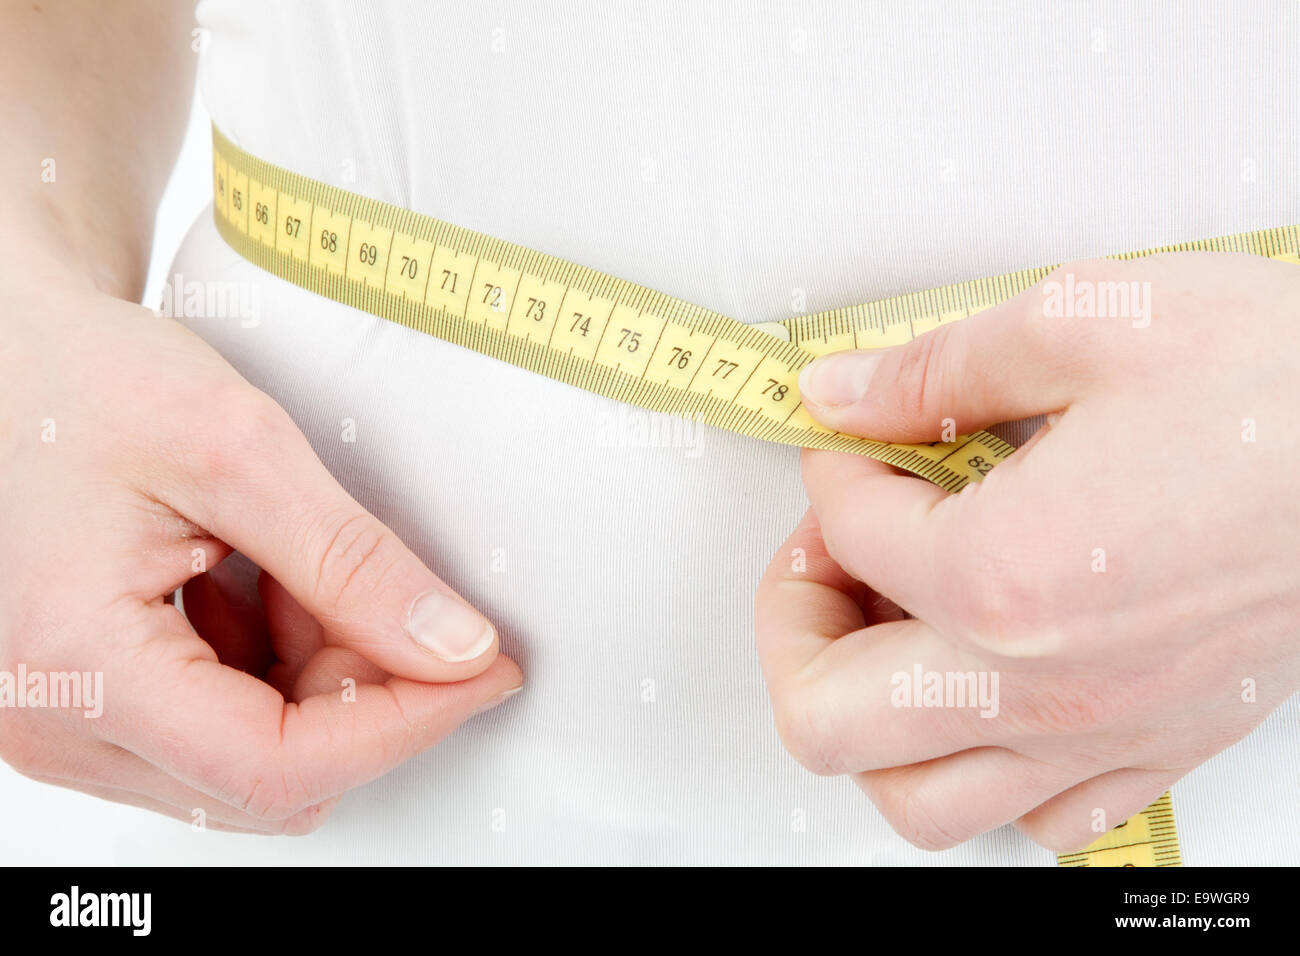 How to Measure Your Waist with Tape Measure - China Tape Measure